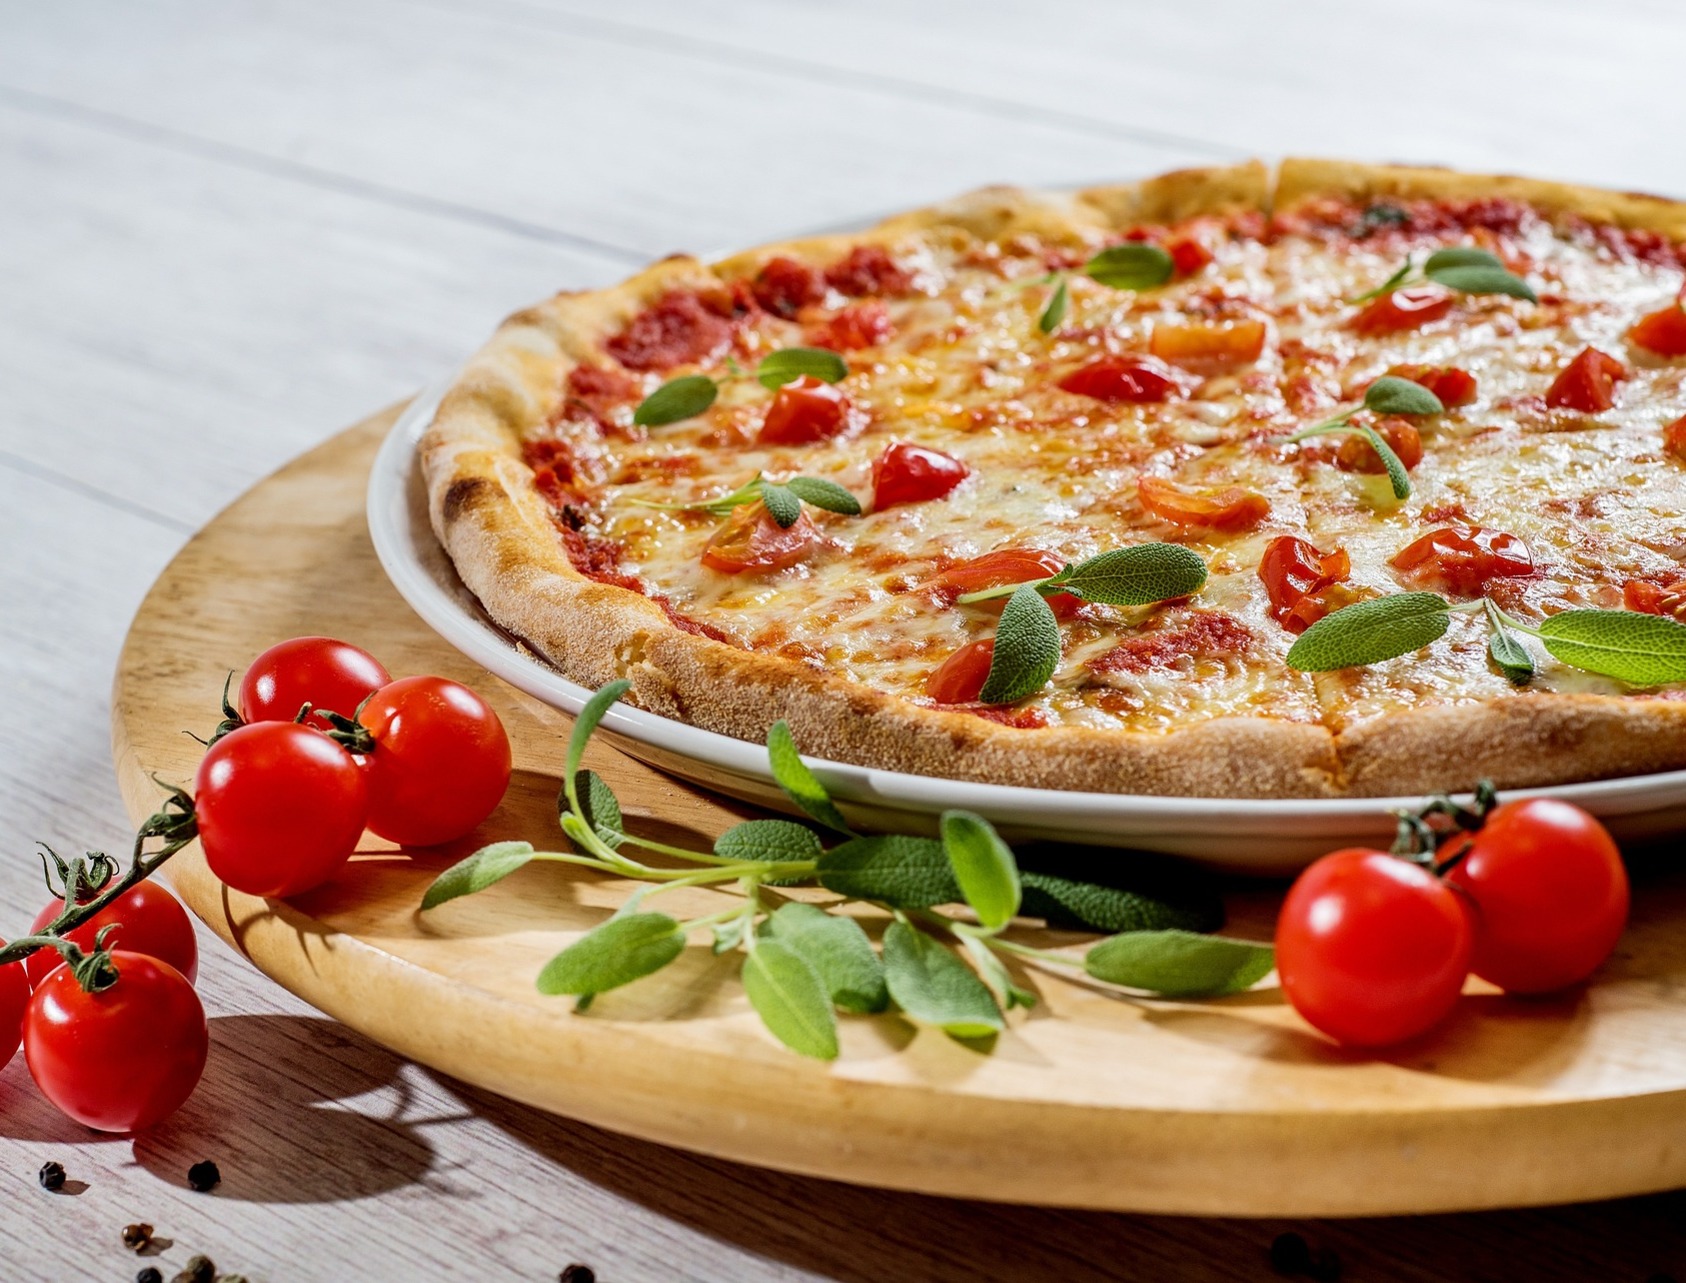 A mozzarella and tomato pizza, which contains gluten.  This is a common food which may accidentally contain gluten.  Our No Win No Fee Solicitors can assist with a compensation claim if you have eaten a pizza with undeclared gluten.